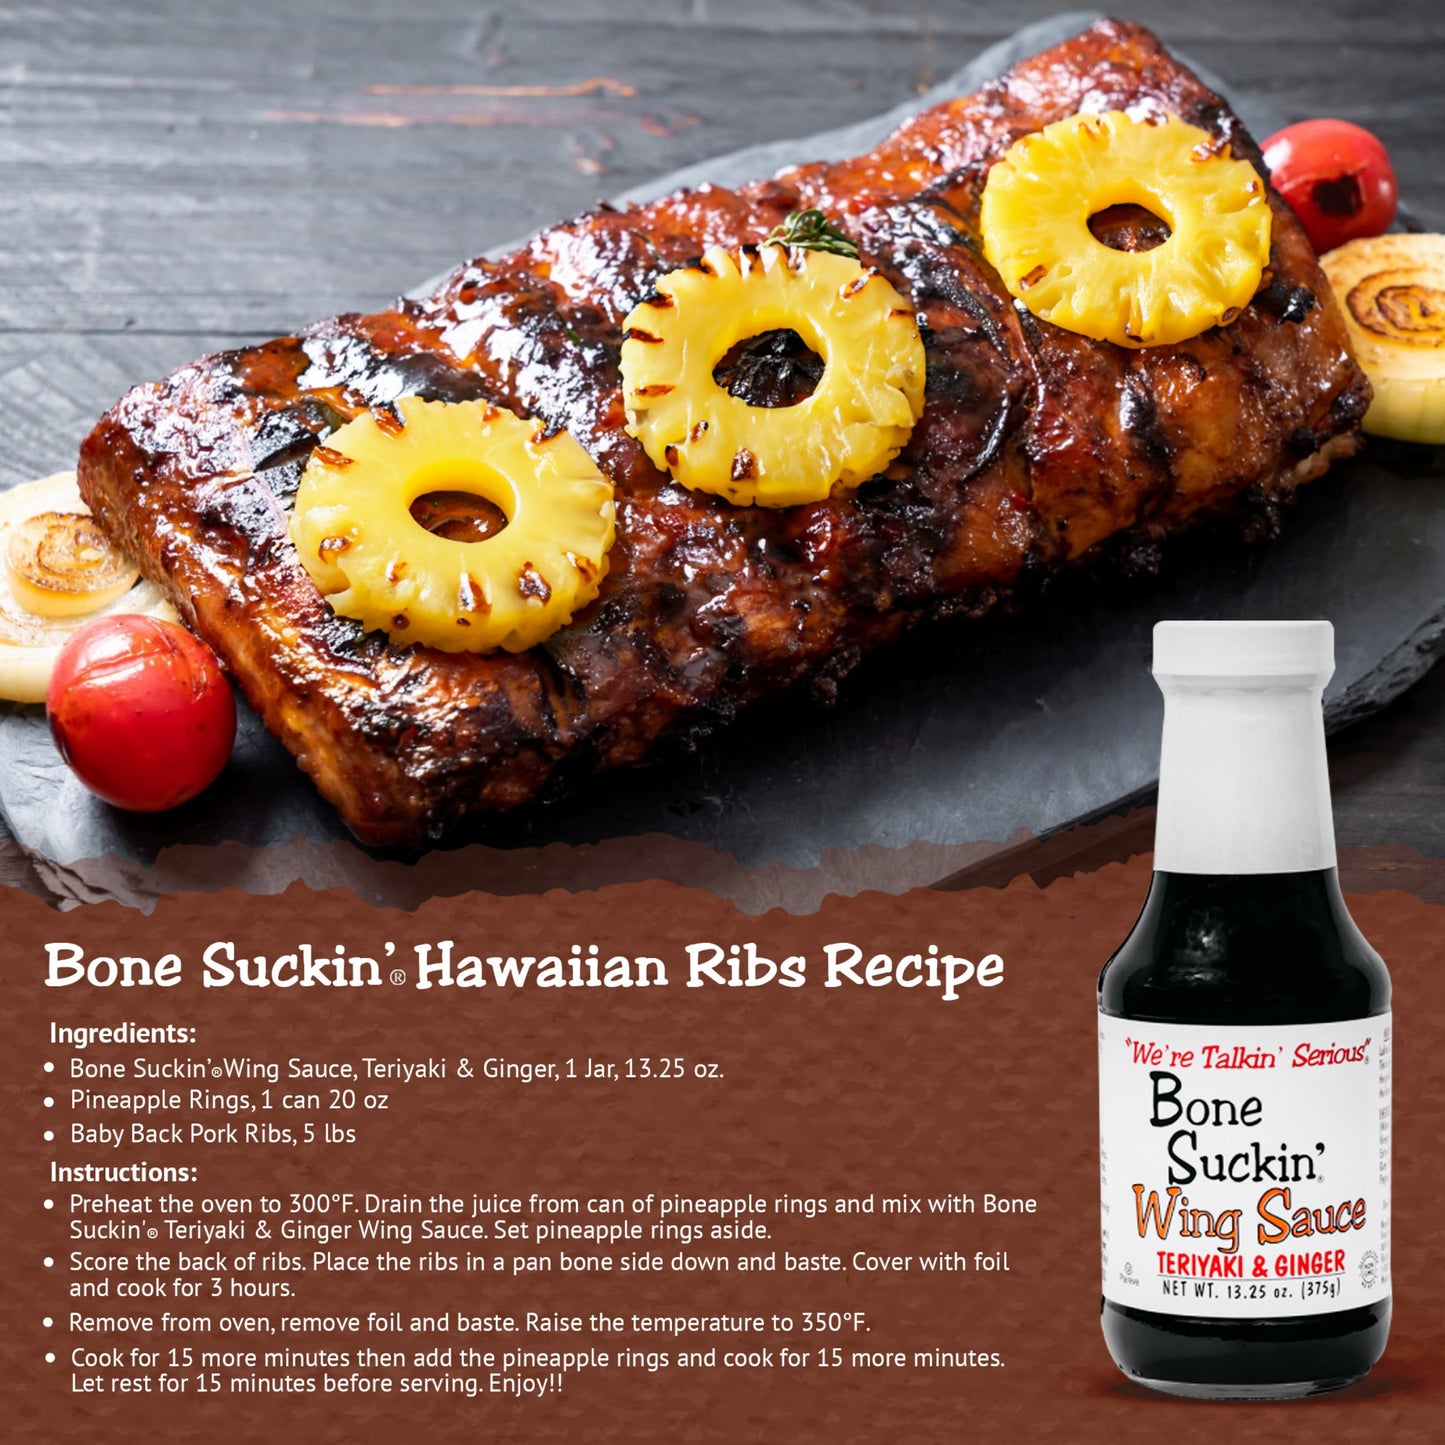 Bone Suckin'® Wing Sauce, Teriyaki & Ginger Hawaiian Ribs Recipe. Ingredients: Bone Suckin' Teriyaki & Ginger Wing Sauce, 1 jar. 1 can pineapple rings. 5 lbs Baby Back Pork Ribs. Instructions: Preheat oven to 300. Drain juice from pineapples and mix with Bone Suckin' Teriyaki & Ginger Wing Sauce. Set aside. Score back of ribs. Place ribs bone side down in a pan and baste. Cover with foil and cook for 3 hours. Remove from oven, baste, raise temp to 350. Cook 15 min. Add pinapple rings. Cook 15 more minutes